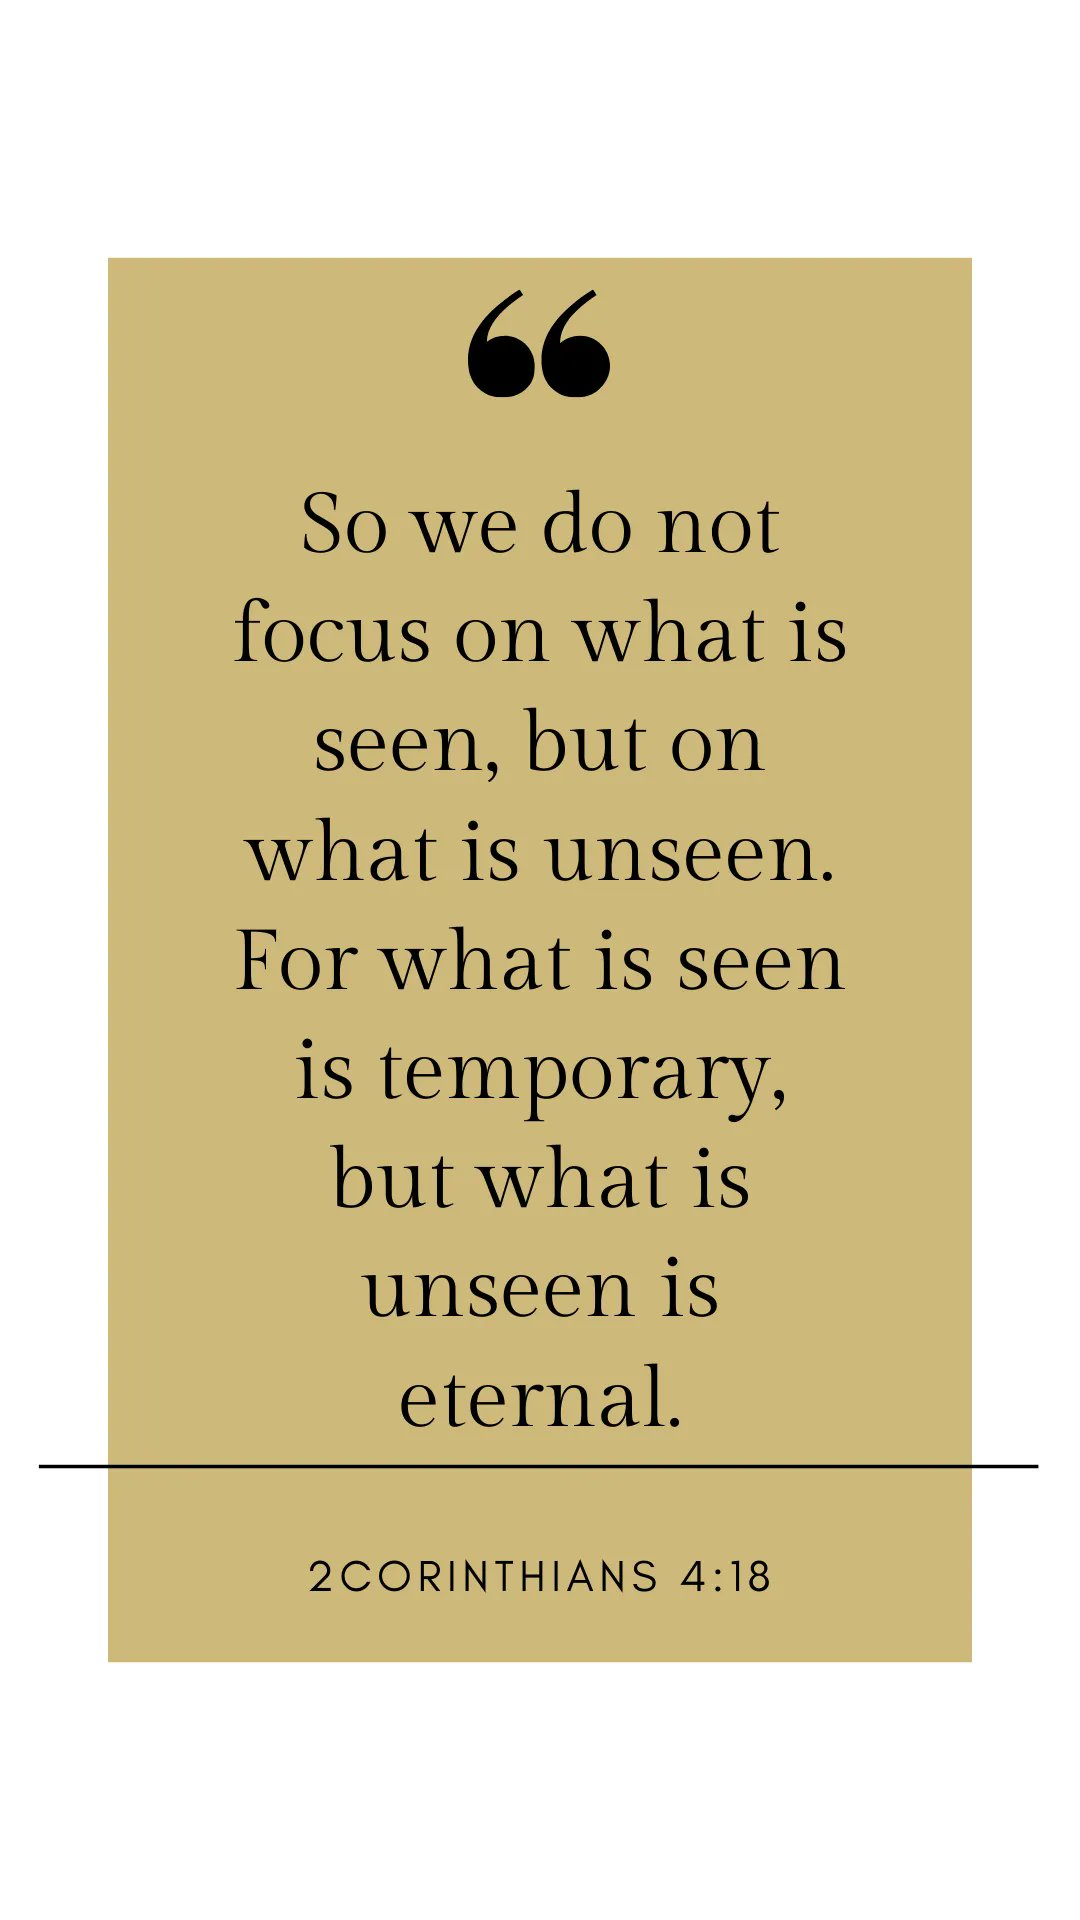 66 So we do not focus on what is seen; but on what is unseen: For what is seen is temporary, but what is unseen is eternal: 2CORINTHIANS 4:18